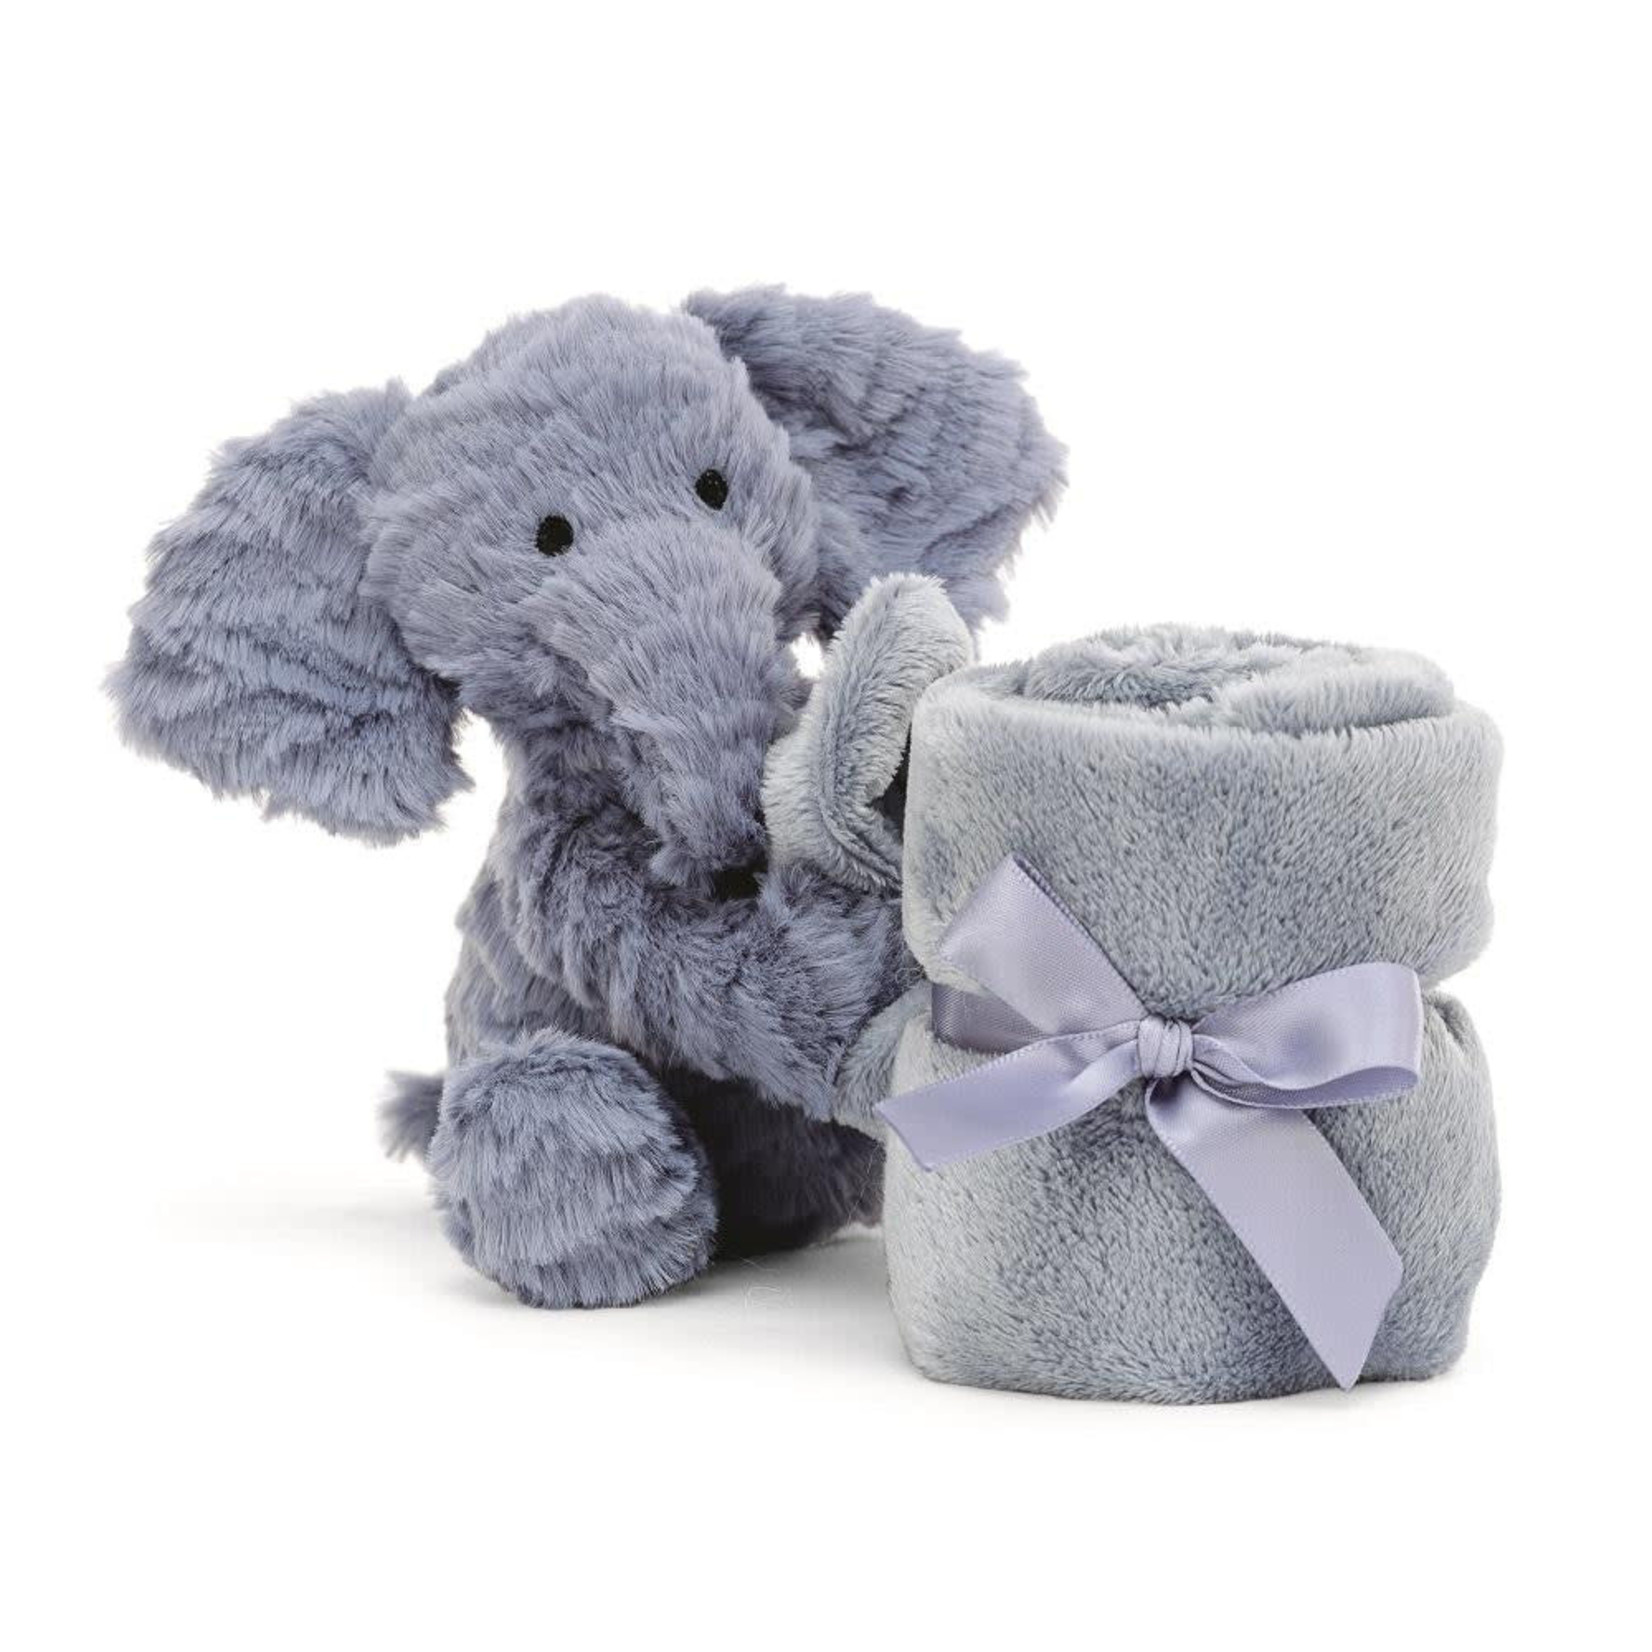 Jellycat Jellycat  Fuddlewuddle Elephant Soother